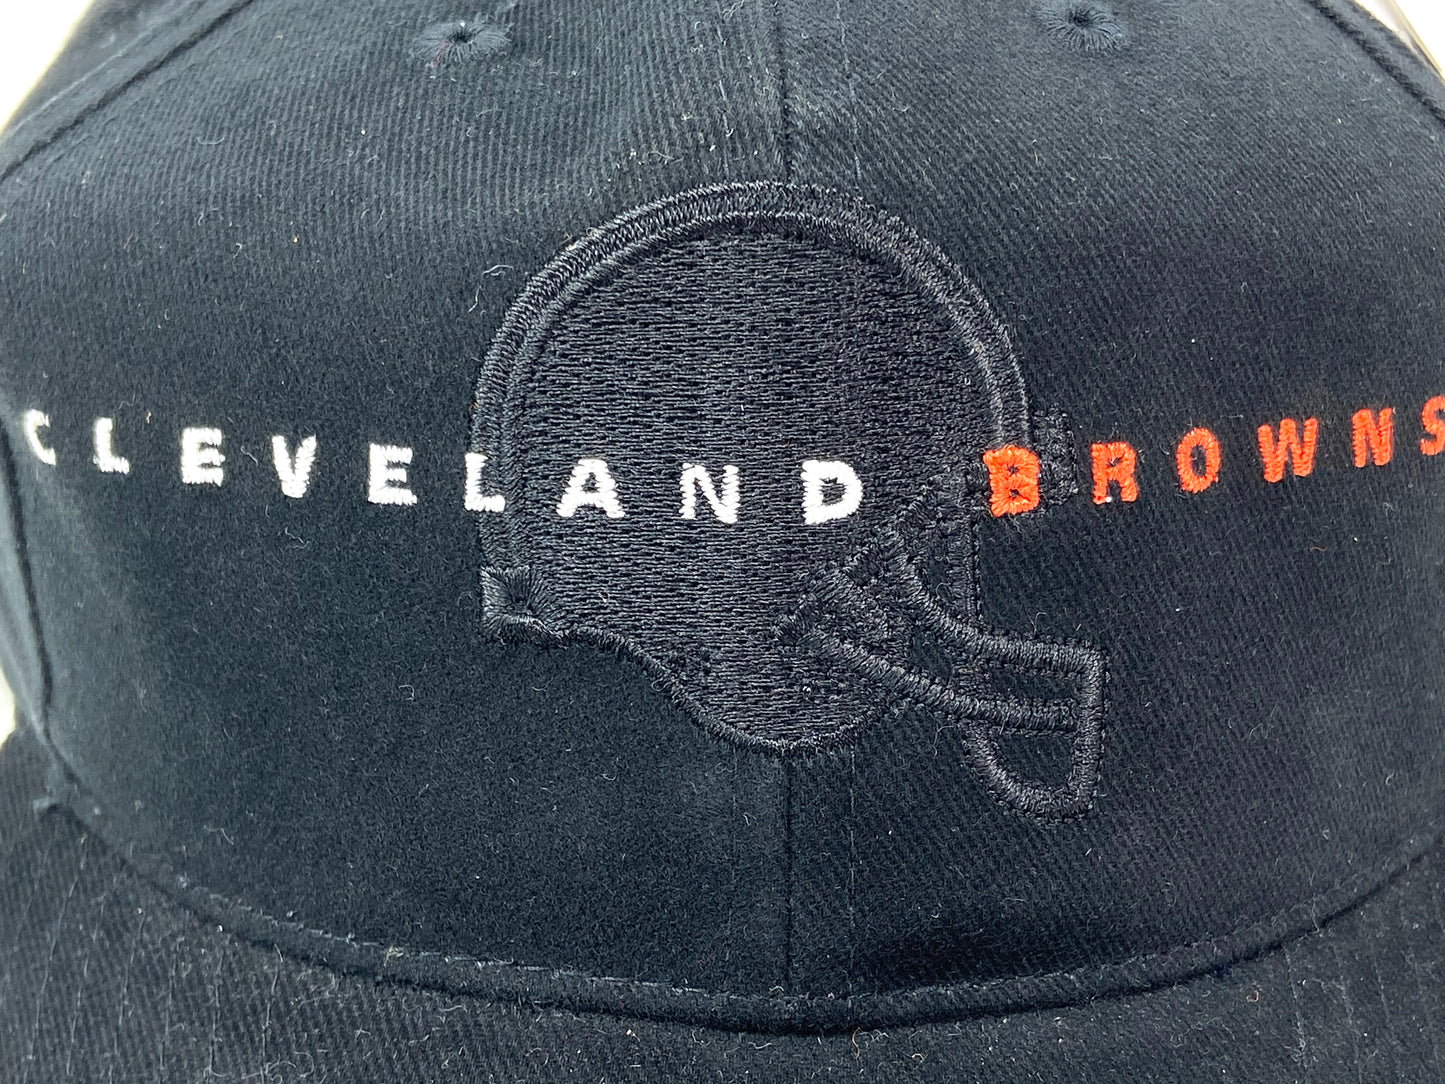 Cleveland Browns Vintage NFL Black Cotton Snapback by American Needle